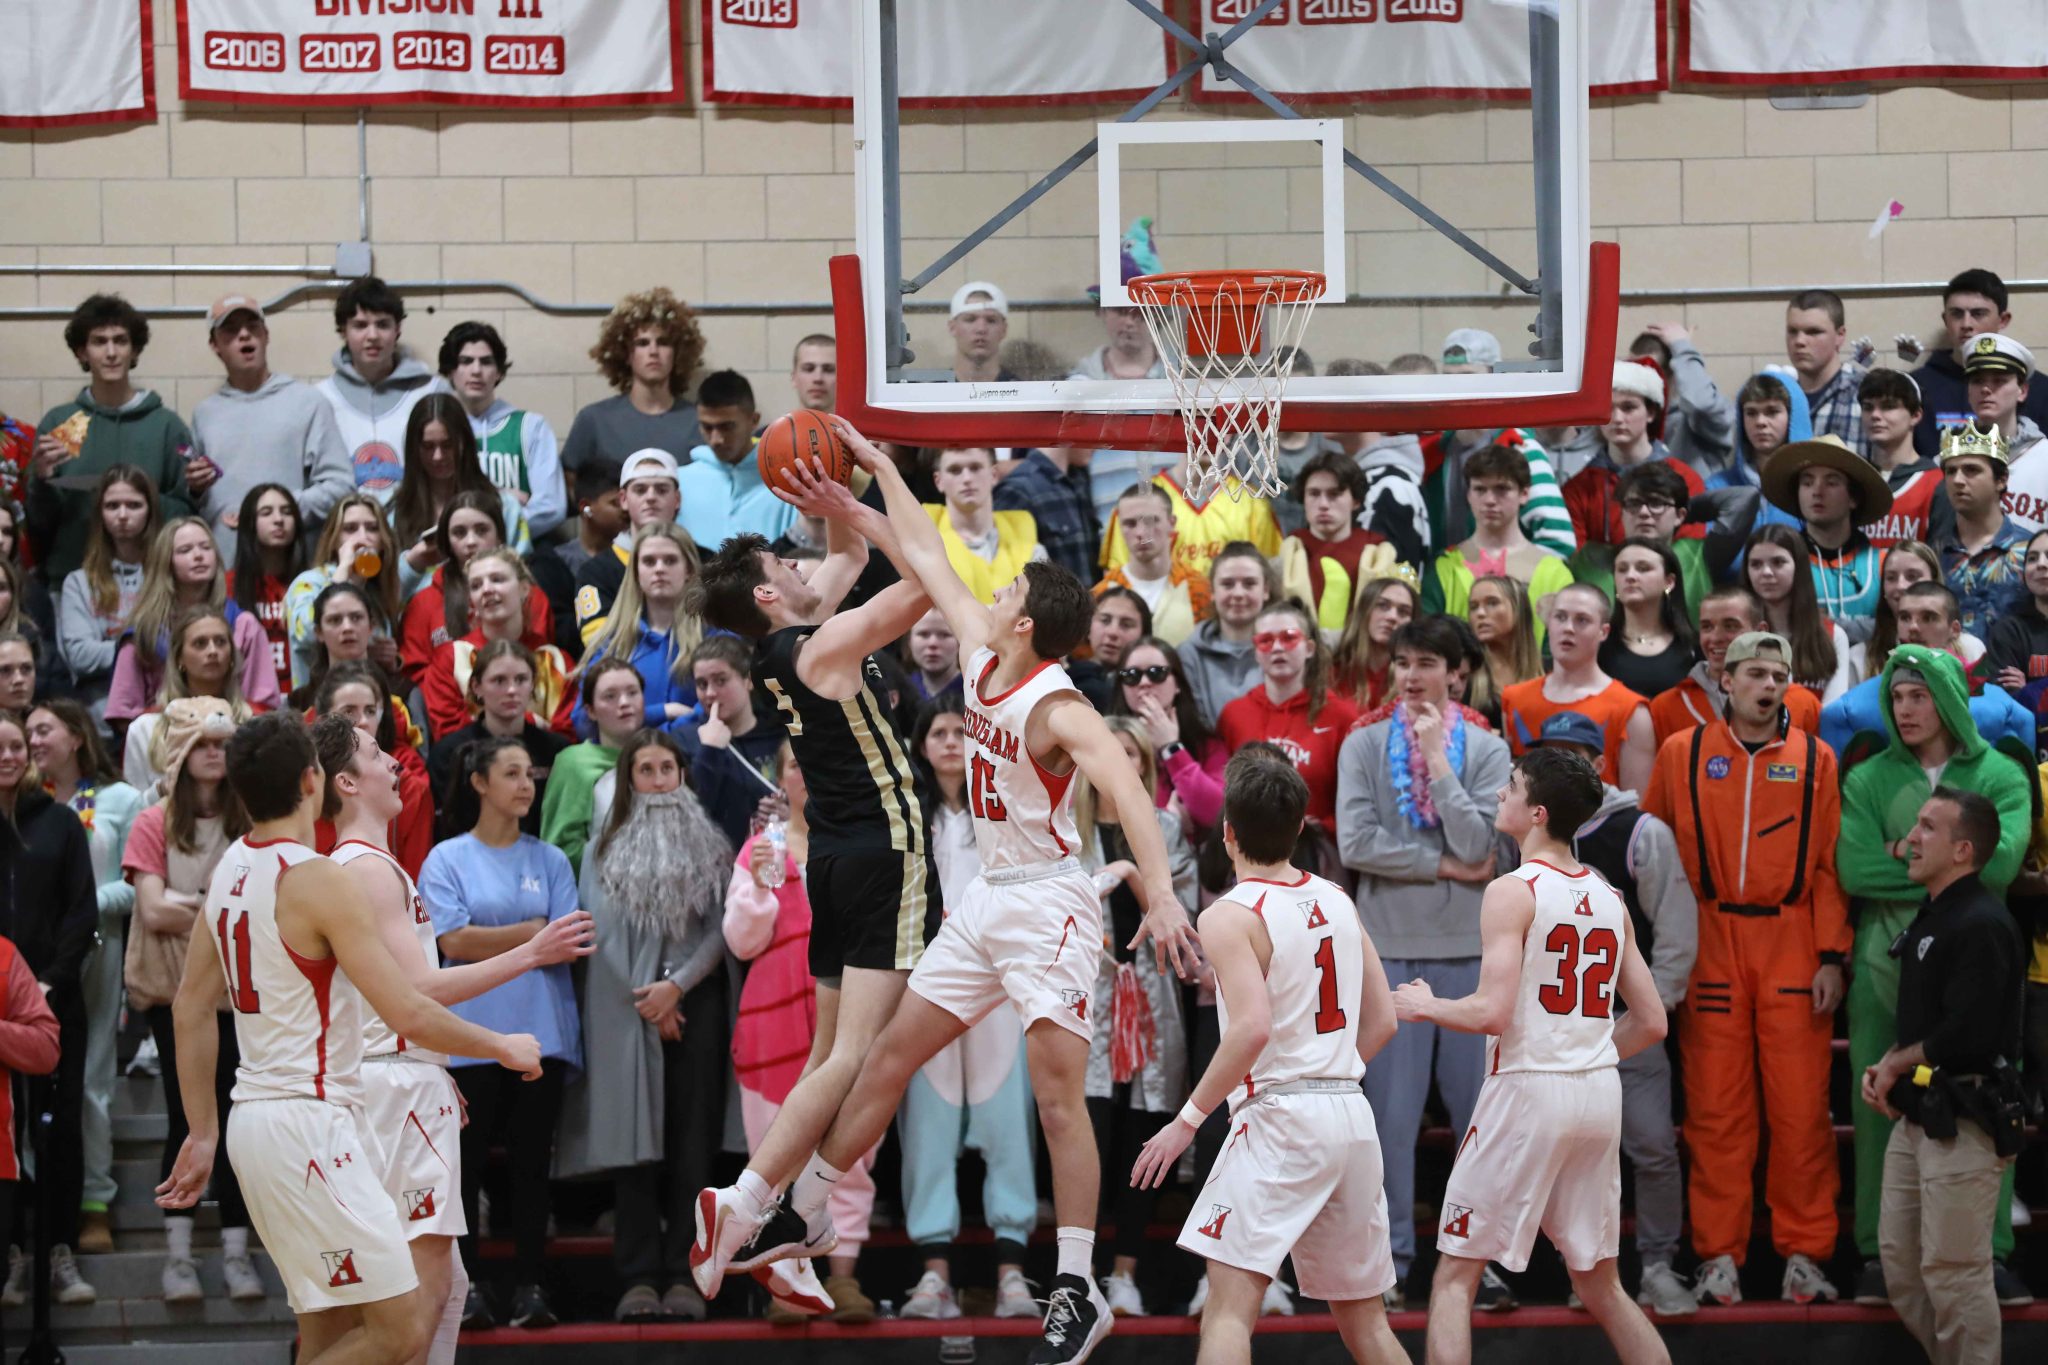 Junior Eddie Rochte with a big block in the second half of Hingham's opening round playoff game.